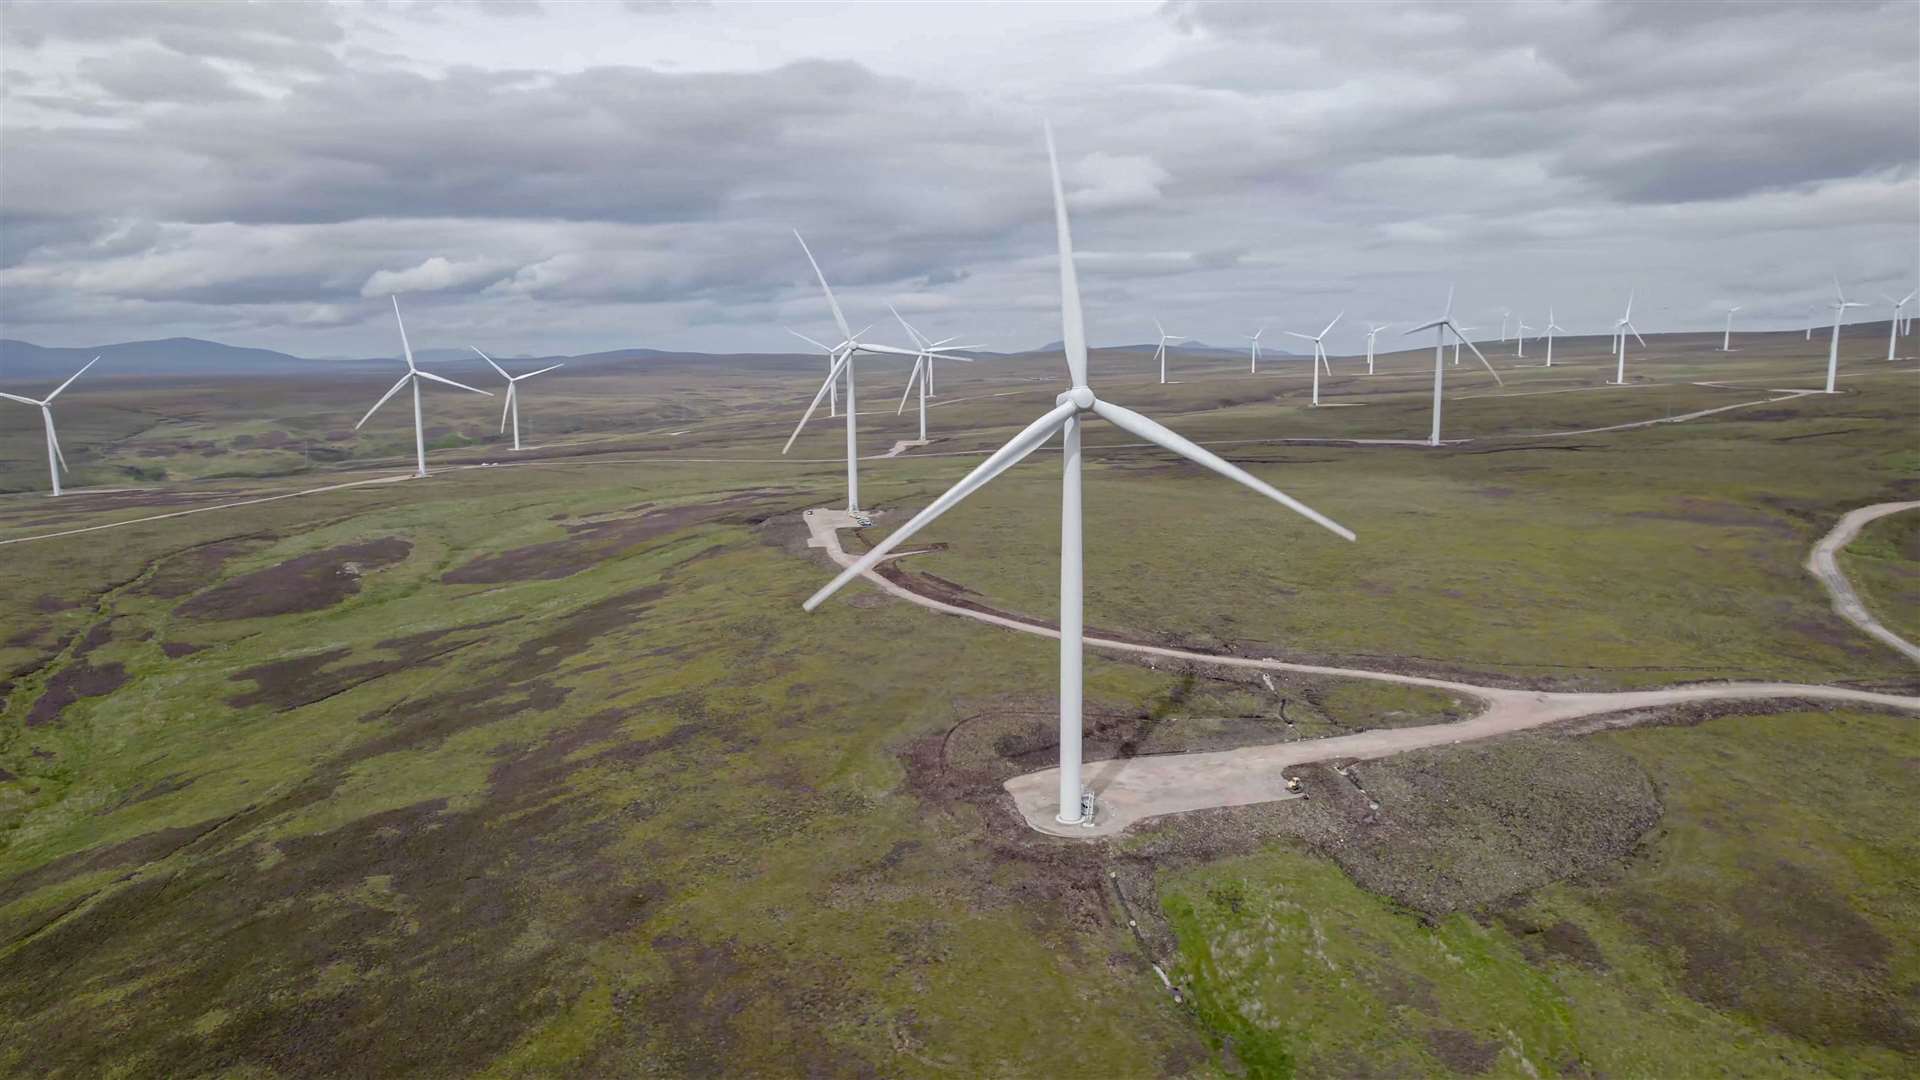 SSE Renewables and Siemens Gamesa Renewable Energy have unveiled plans to produce and deliver green hydrogen through electrolysis using renewable energy from the 100MW-plus Gordonbush onshore wind farm in Sutherland. Picture: SSE Renewables